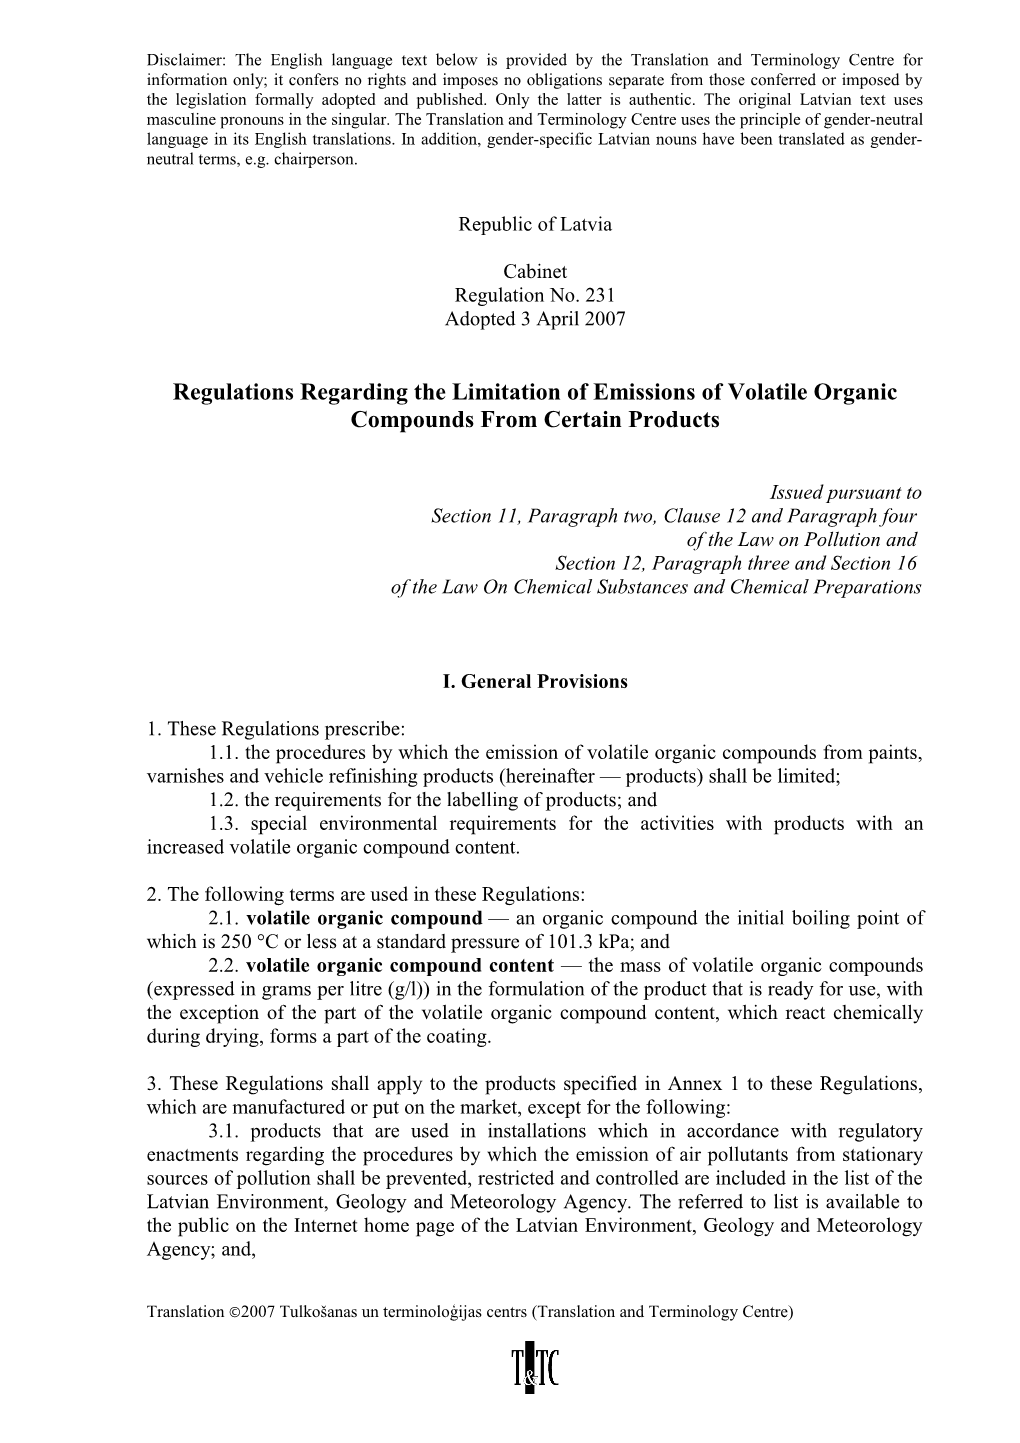 Regulations Regarding the Limitation of Emissions of Volatile Organic Compounds from Certain